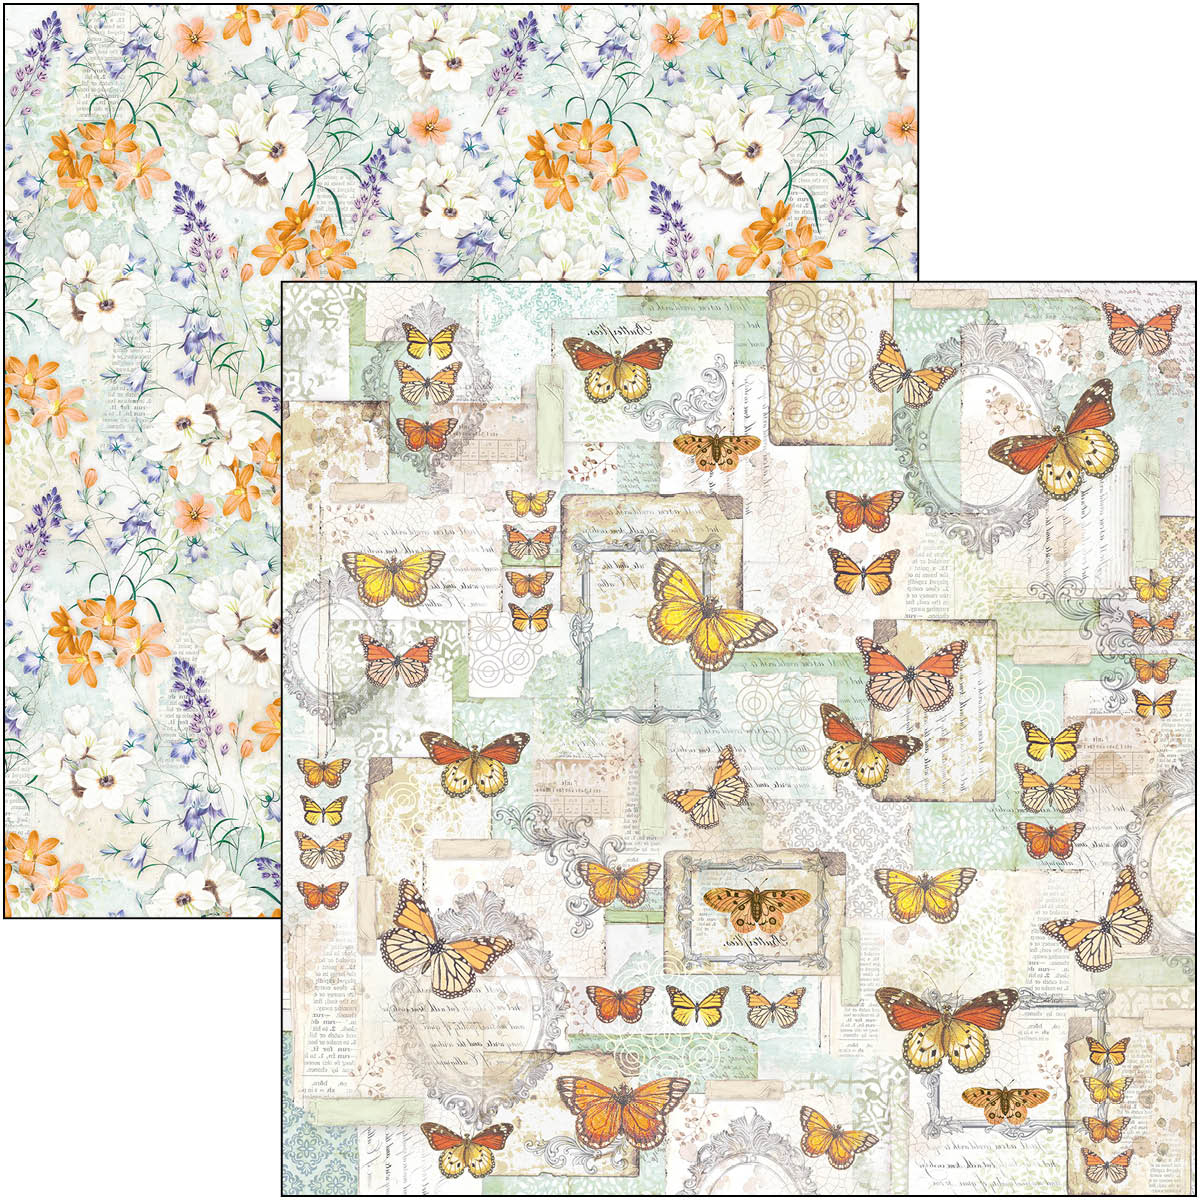 Ciao Bella - Enchanted Land - Paper Pack  (8 ark)  12 x 12"